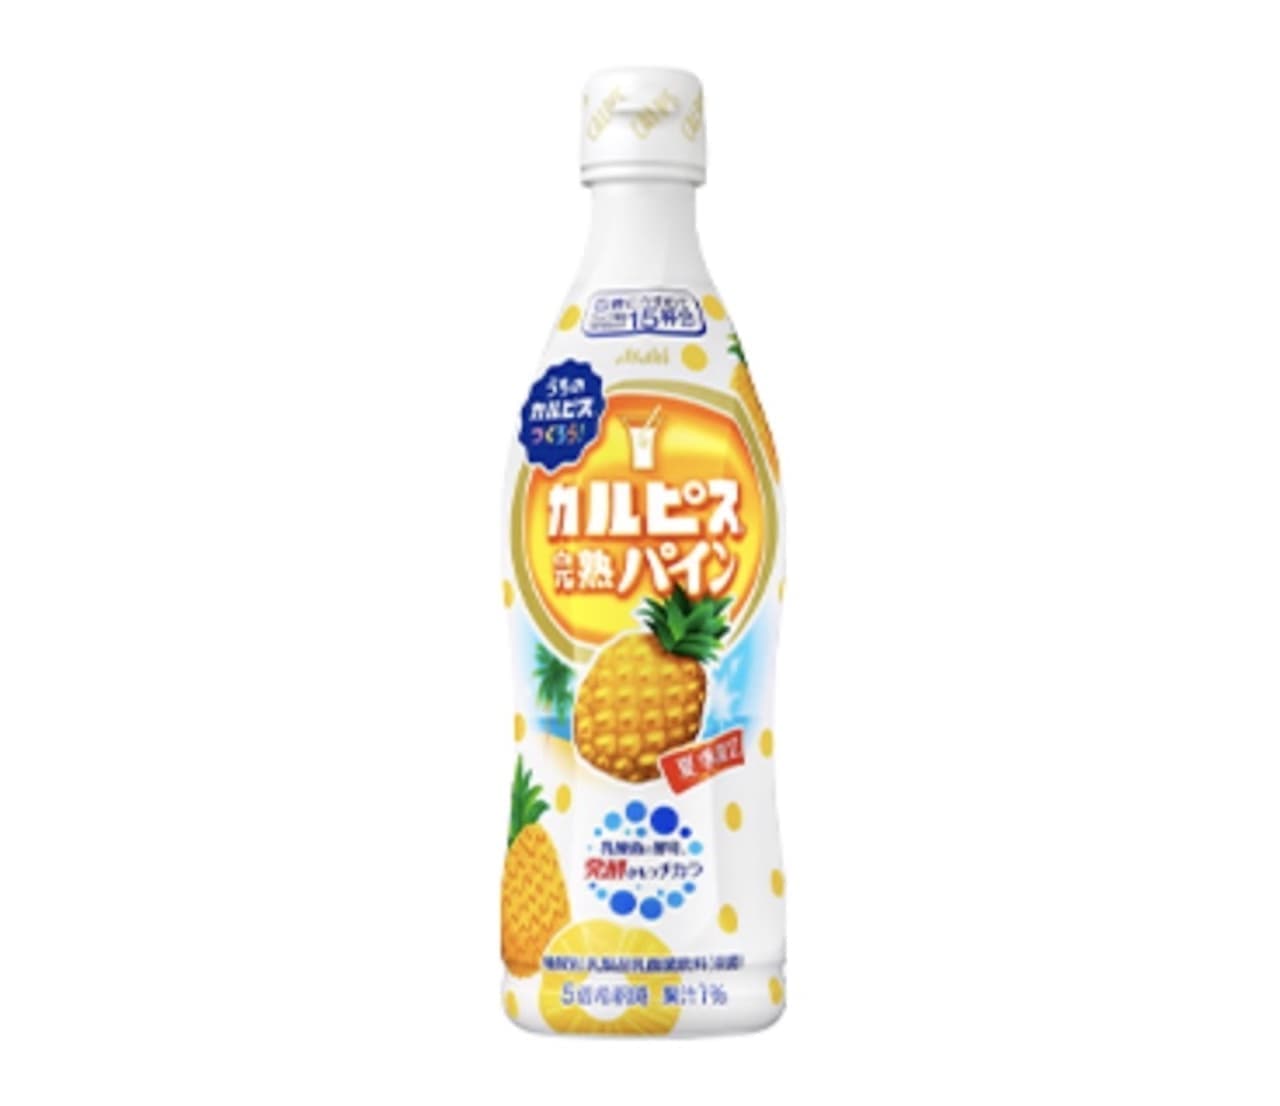 "Calpis ripe pineapple" for a limited time